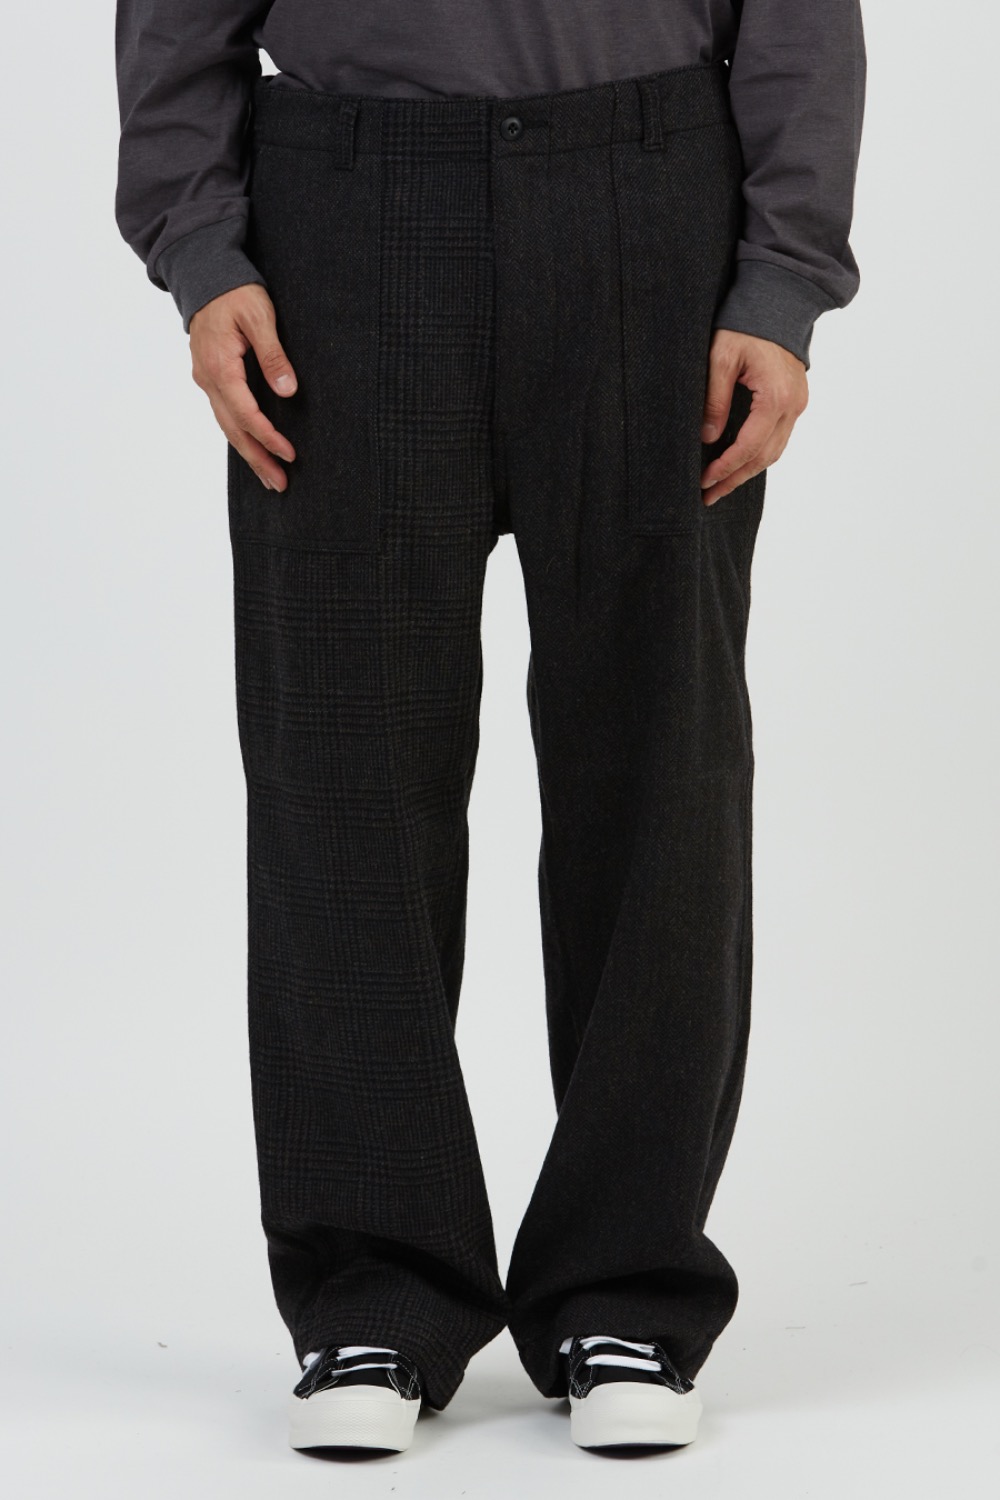 FATIGUE PANT - TWEED/CRAZY PATTERN CHARCOAL